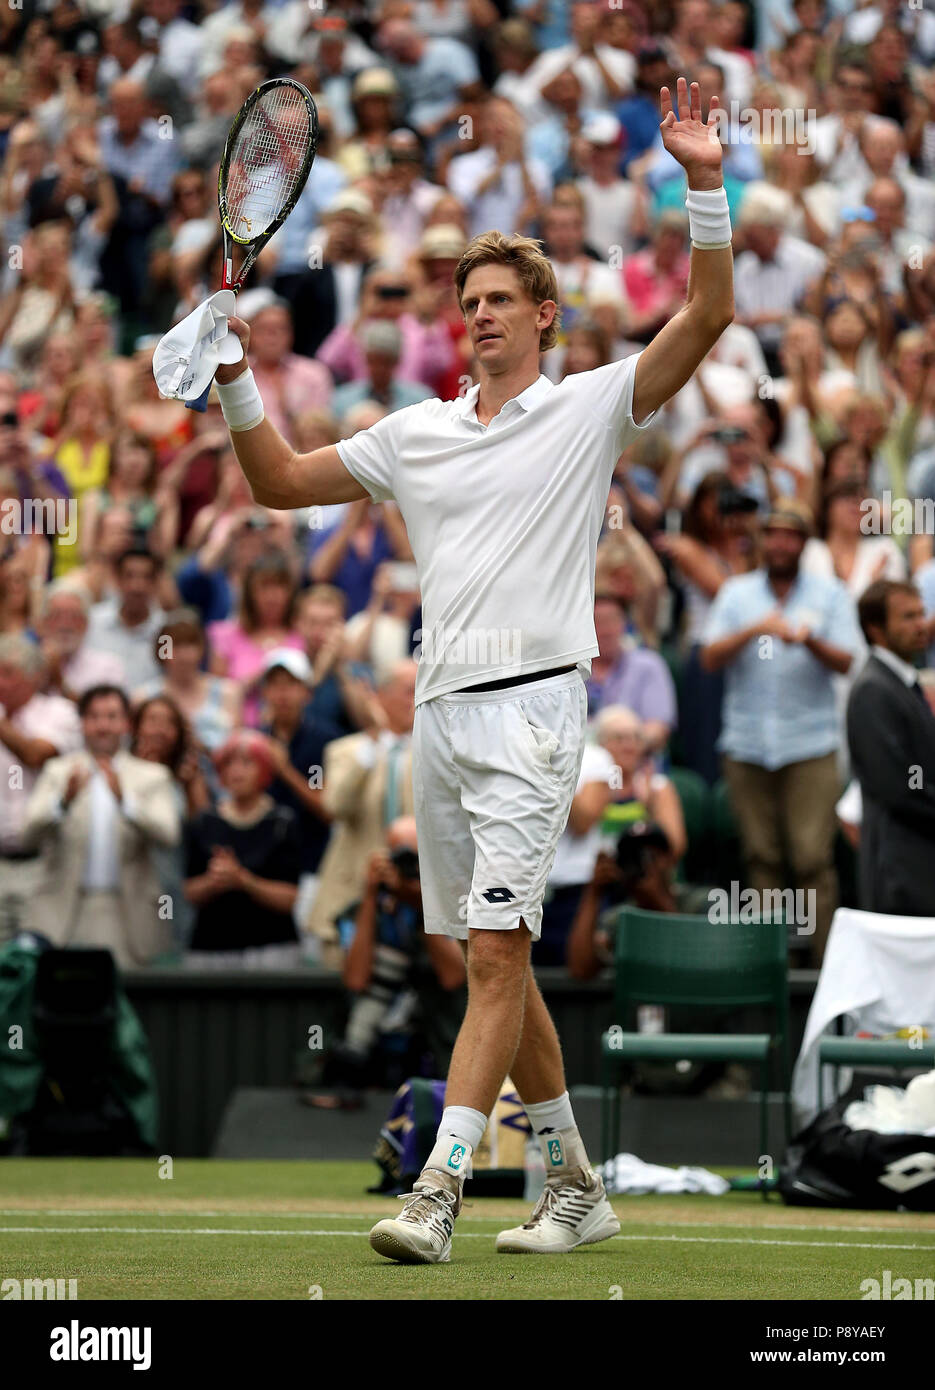 South African eighth seed Kevin Anderson celebrates having reached his first Wimbledon final, beating American ninth seed John Isner 7-6 (8/6) 6-7 (5/7) 6-7 (9/11) 6-4 26-24 in the longest semi-final in the tournament’s history on day eleven of the Wimbledon Championships at the All England Lawn Tennis and Croquet Club, Wimbledon. Stock Photo